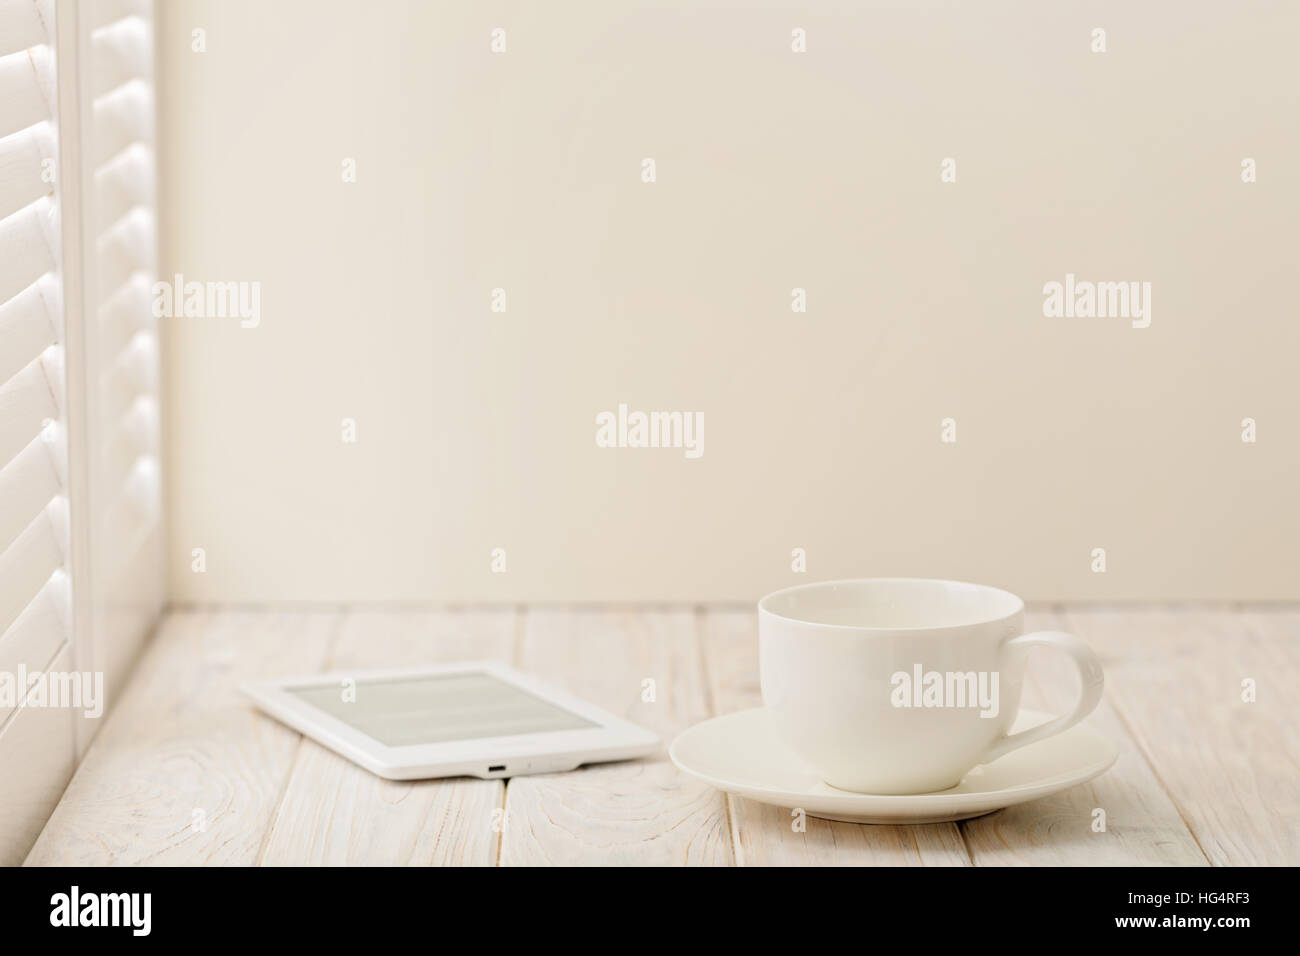 E-book and a cup on a light wooden background near a window with shutters. Stock Photo